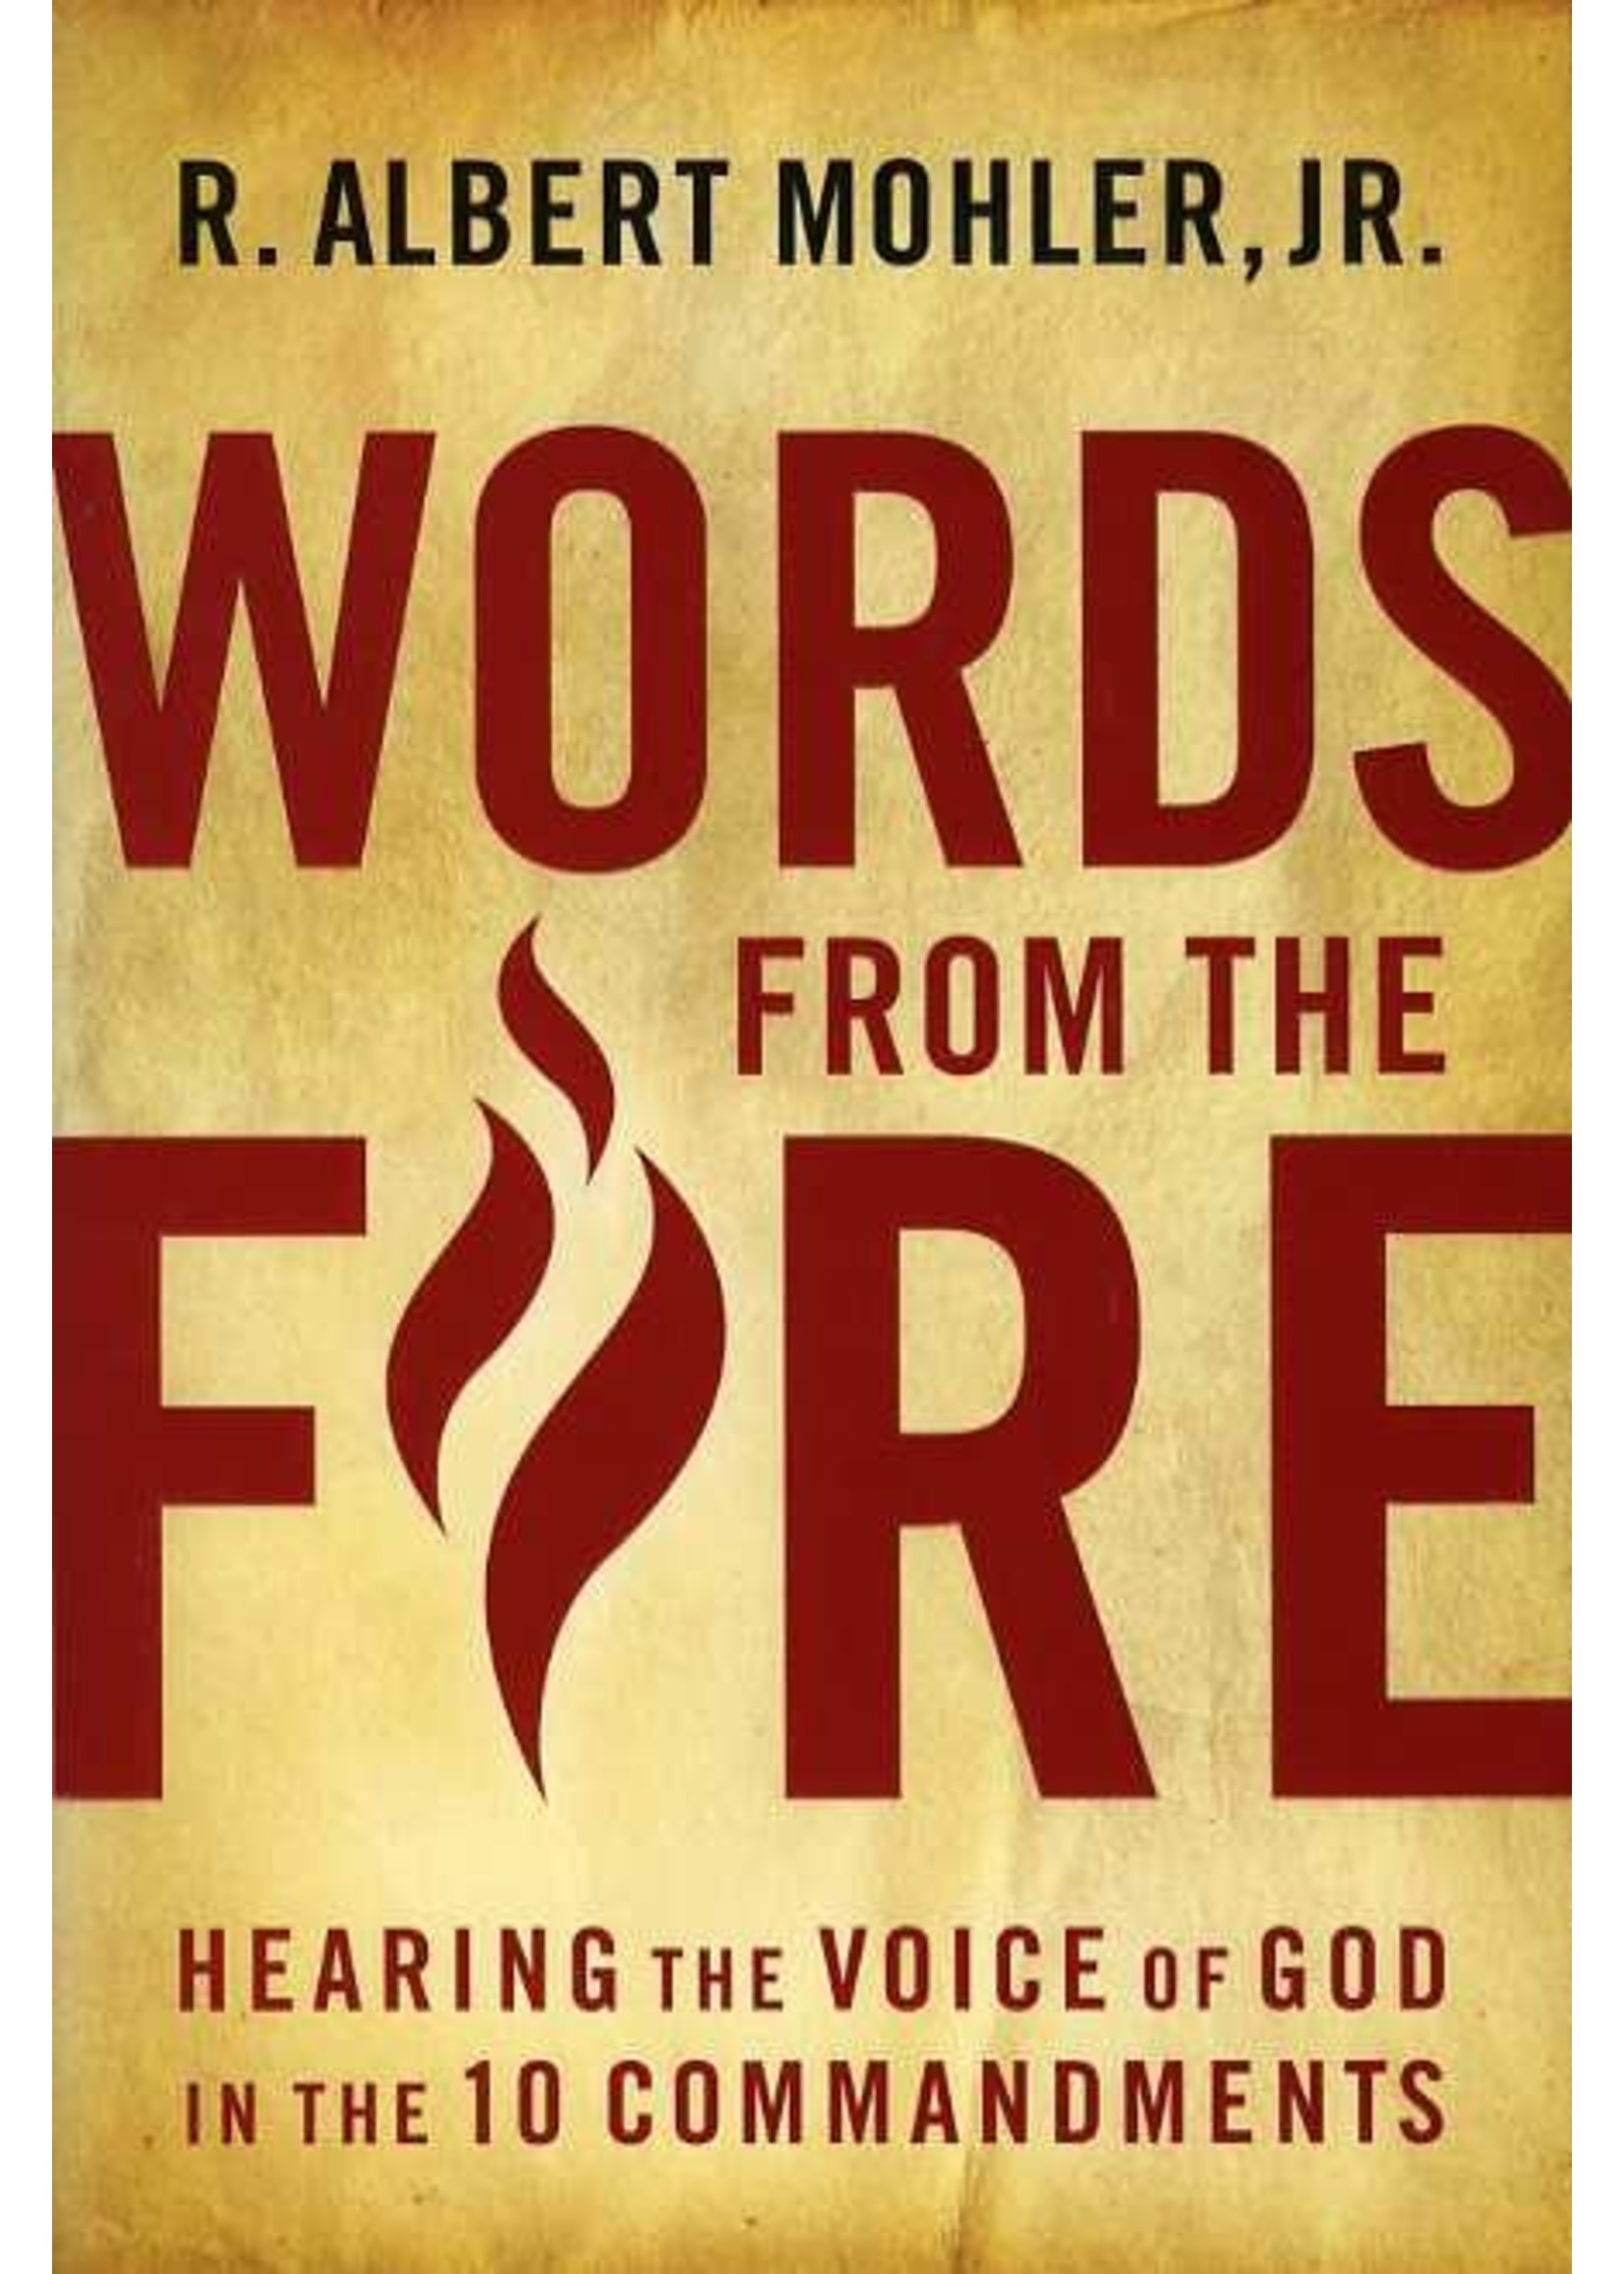 Moody Publishers Words from the Fire - Robert Mohler